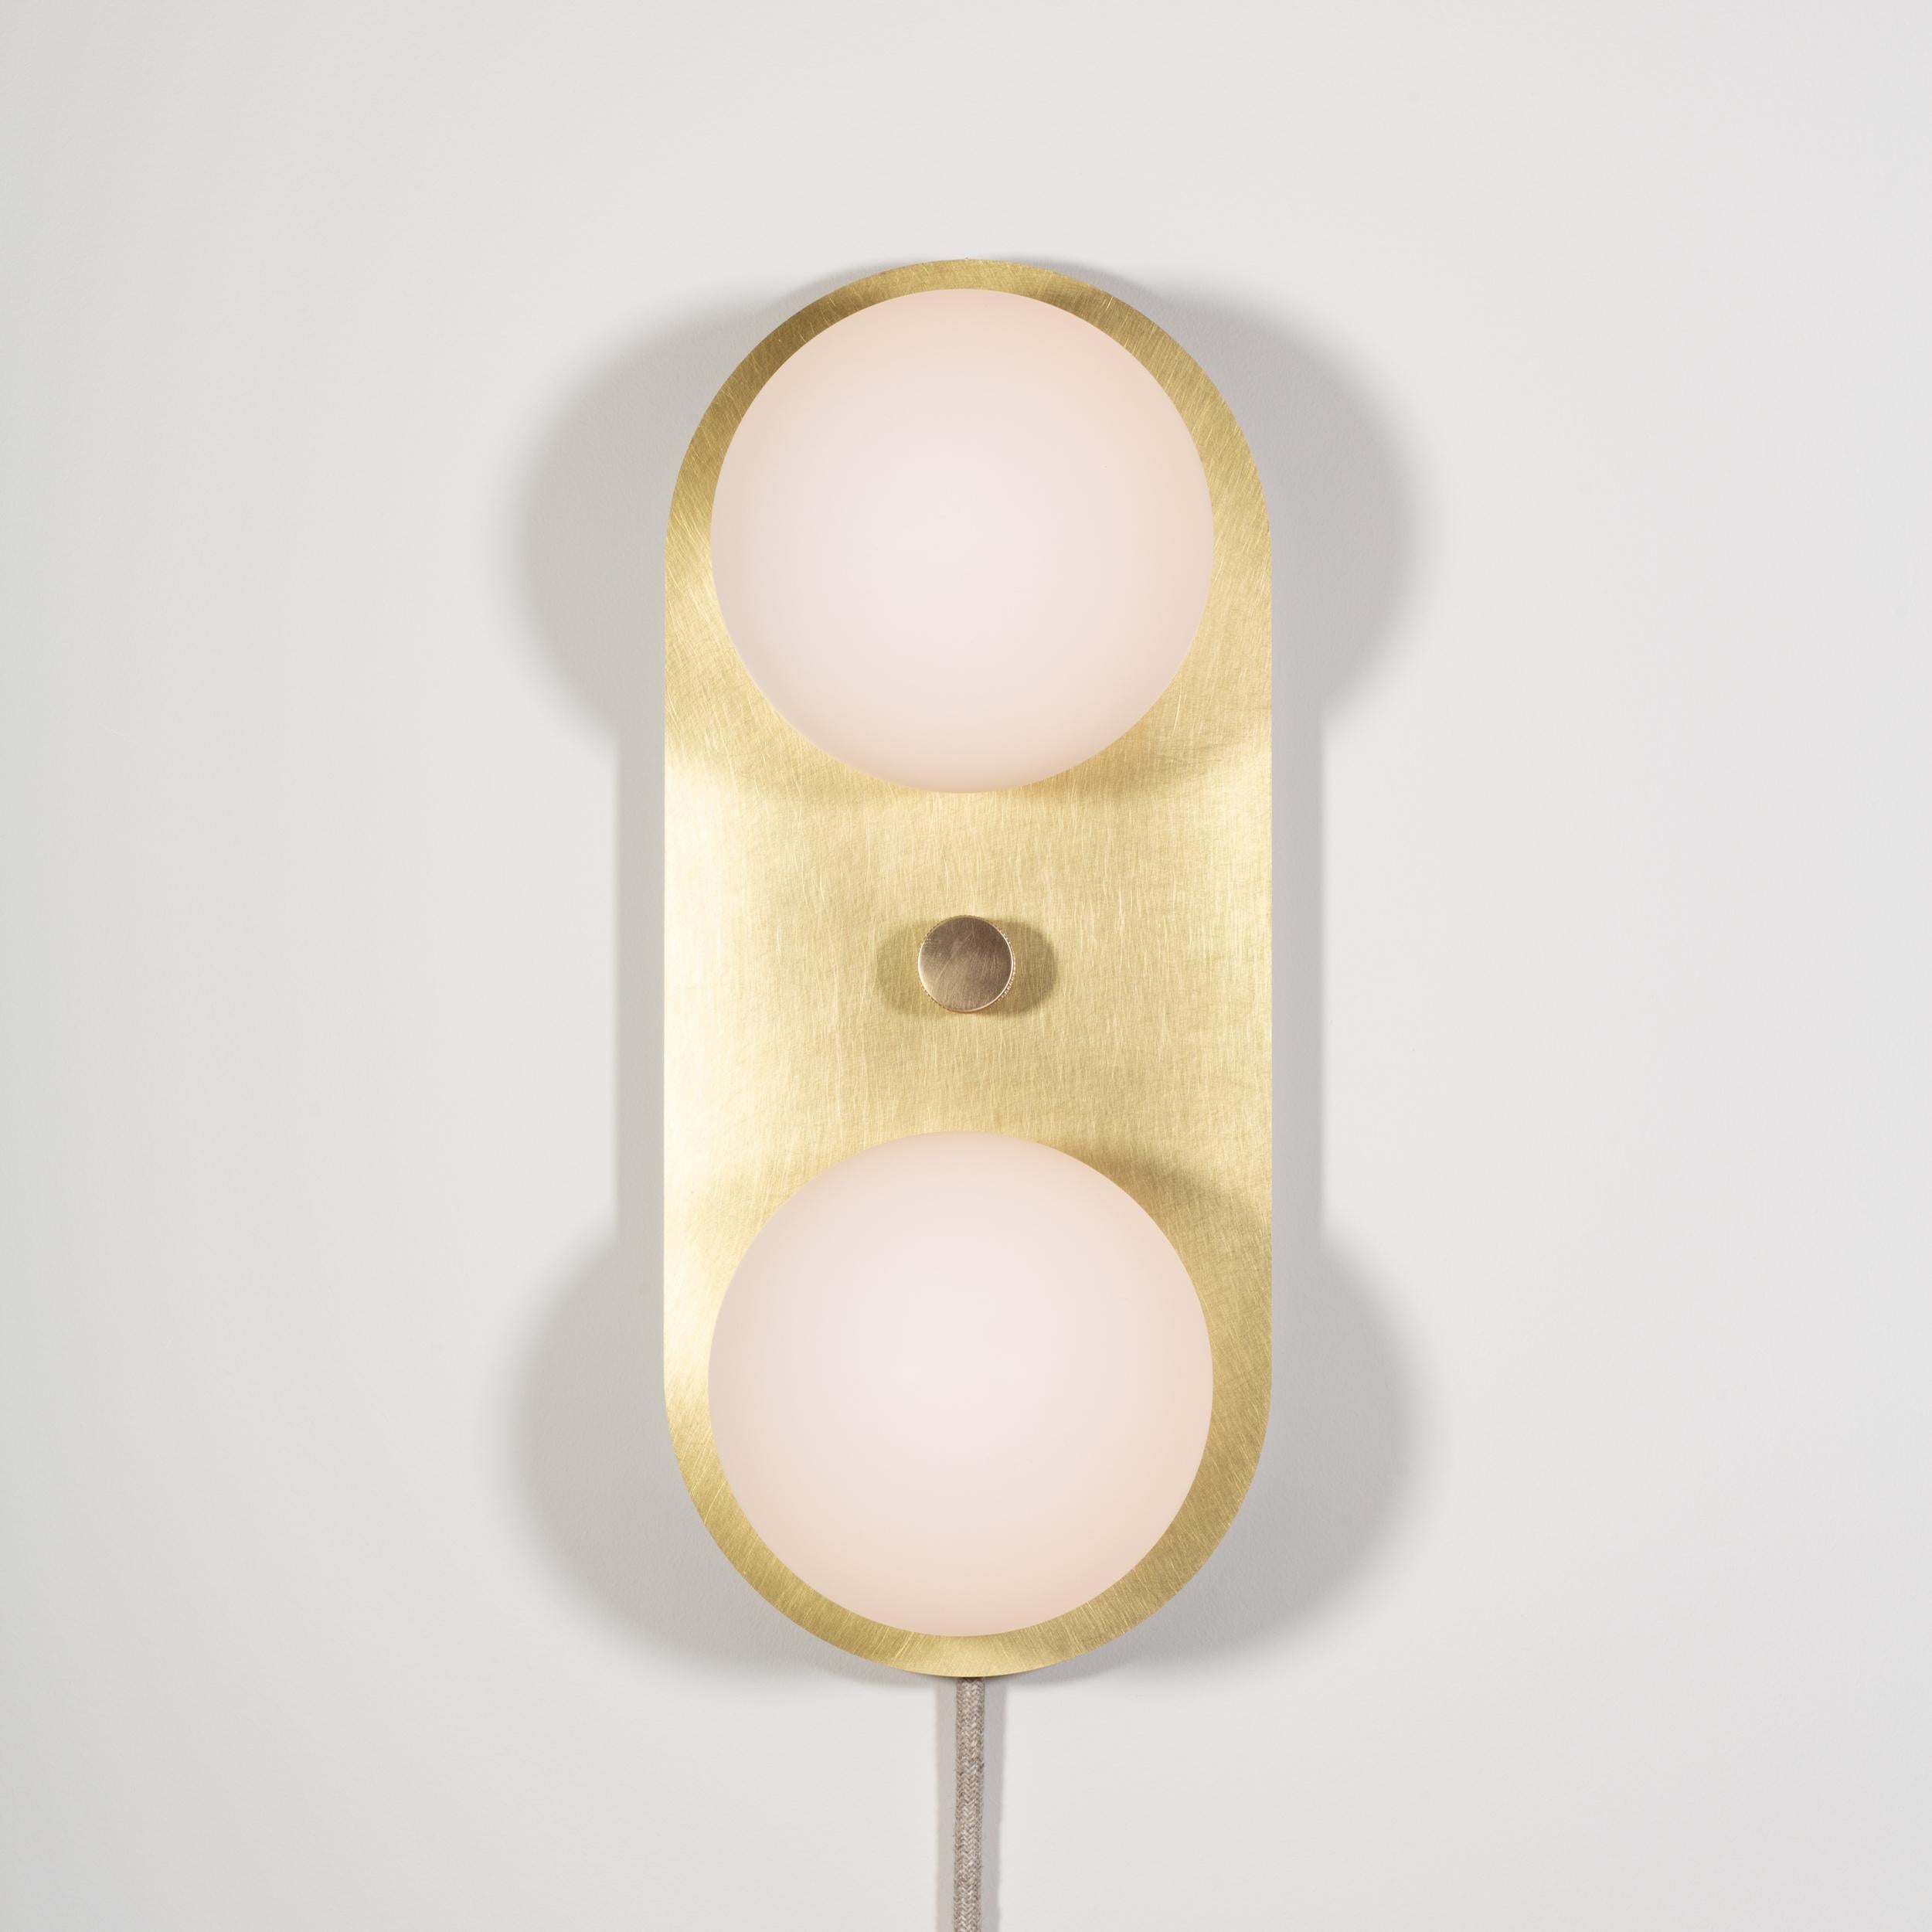 Capsule Double Globe Wall Light
97CRI Dimmable Tala G9 3.6W LEDs | 720 Lumen
Integrated LED dimmer. Linen Fabric Cable Surface Mount or Hard Wired.
Brushed Brass Wall Plate
Solid brass, Satin finish. Lacquered.
ø12cm matte glass globes.
MK UK plug /